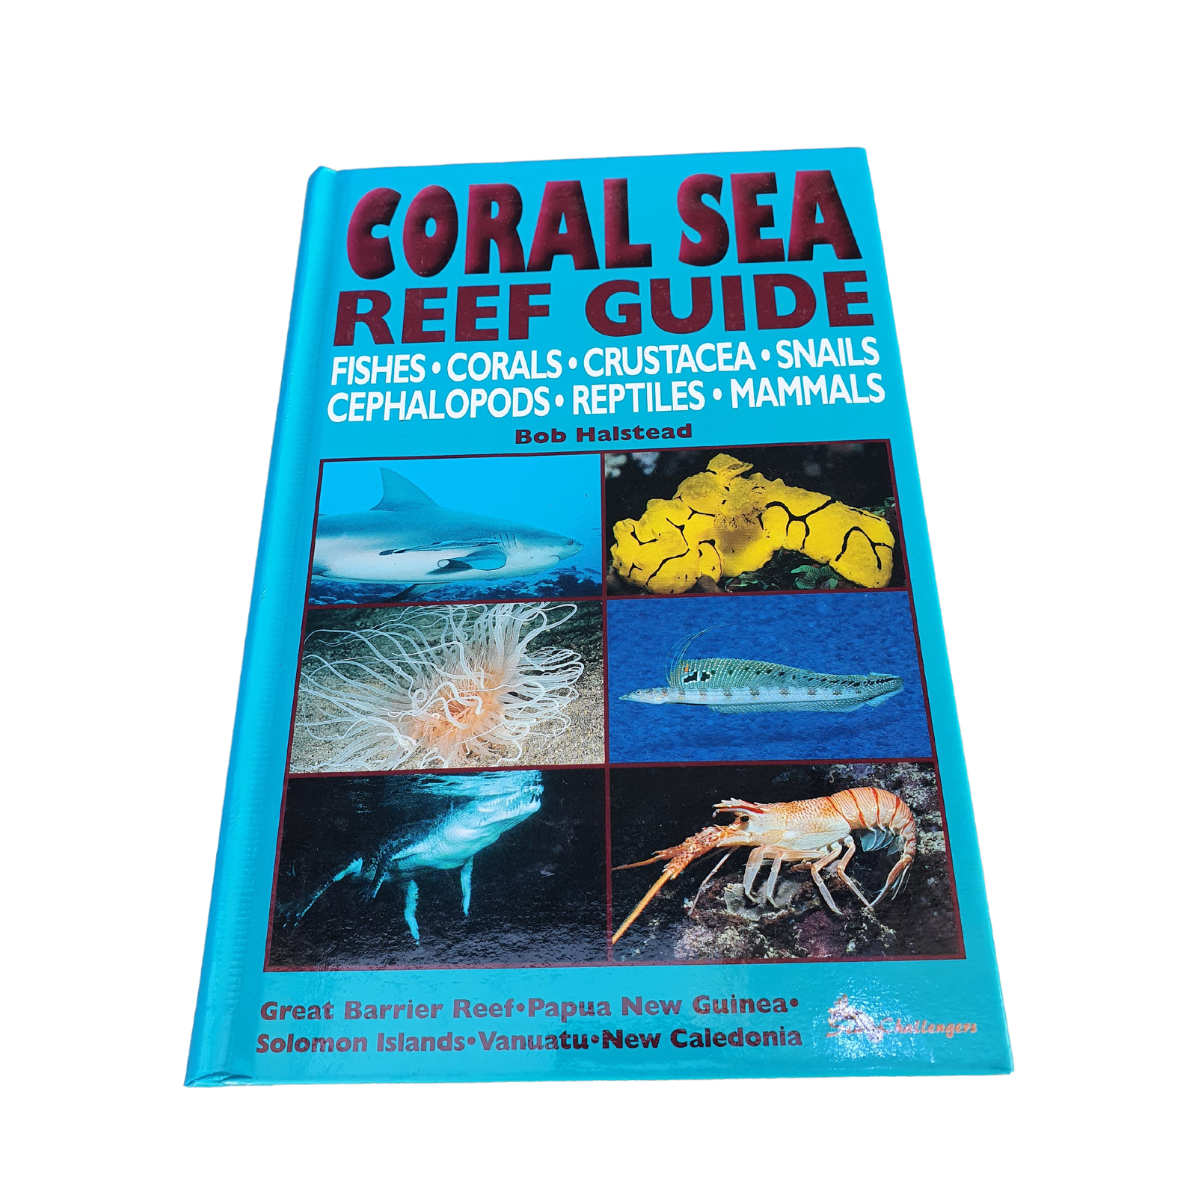 CORAL SEA REEF GUIDE